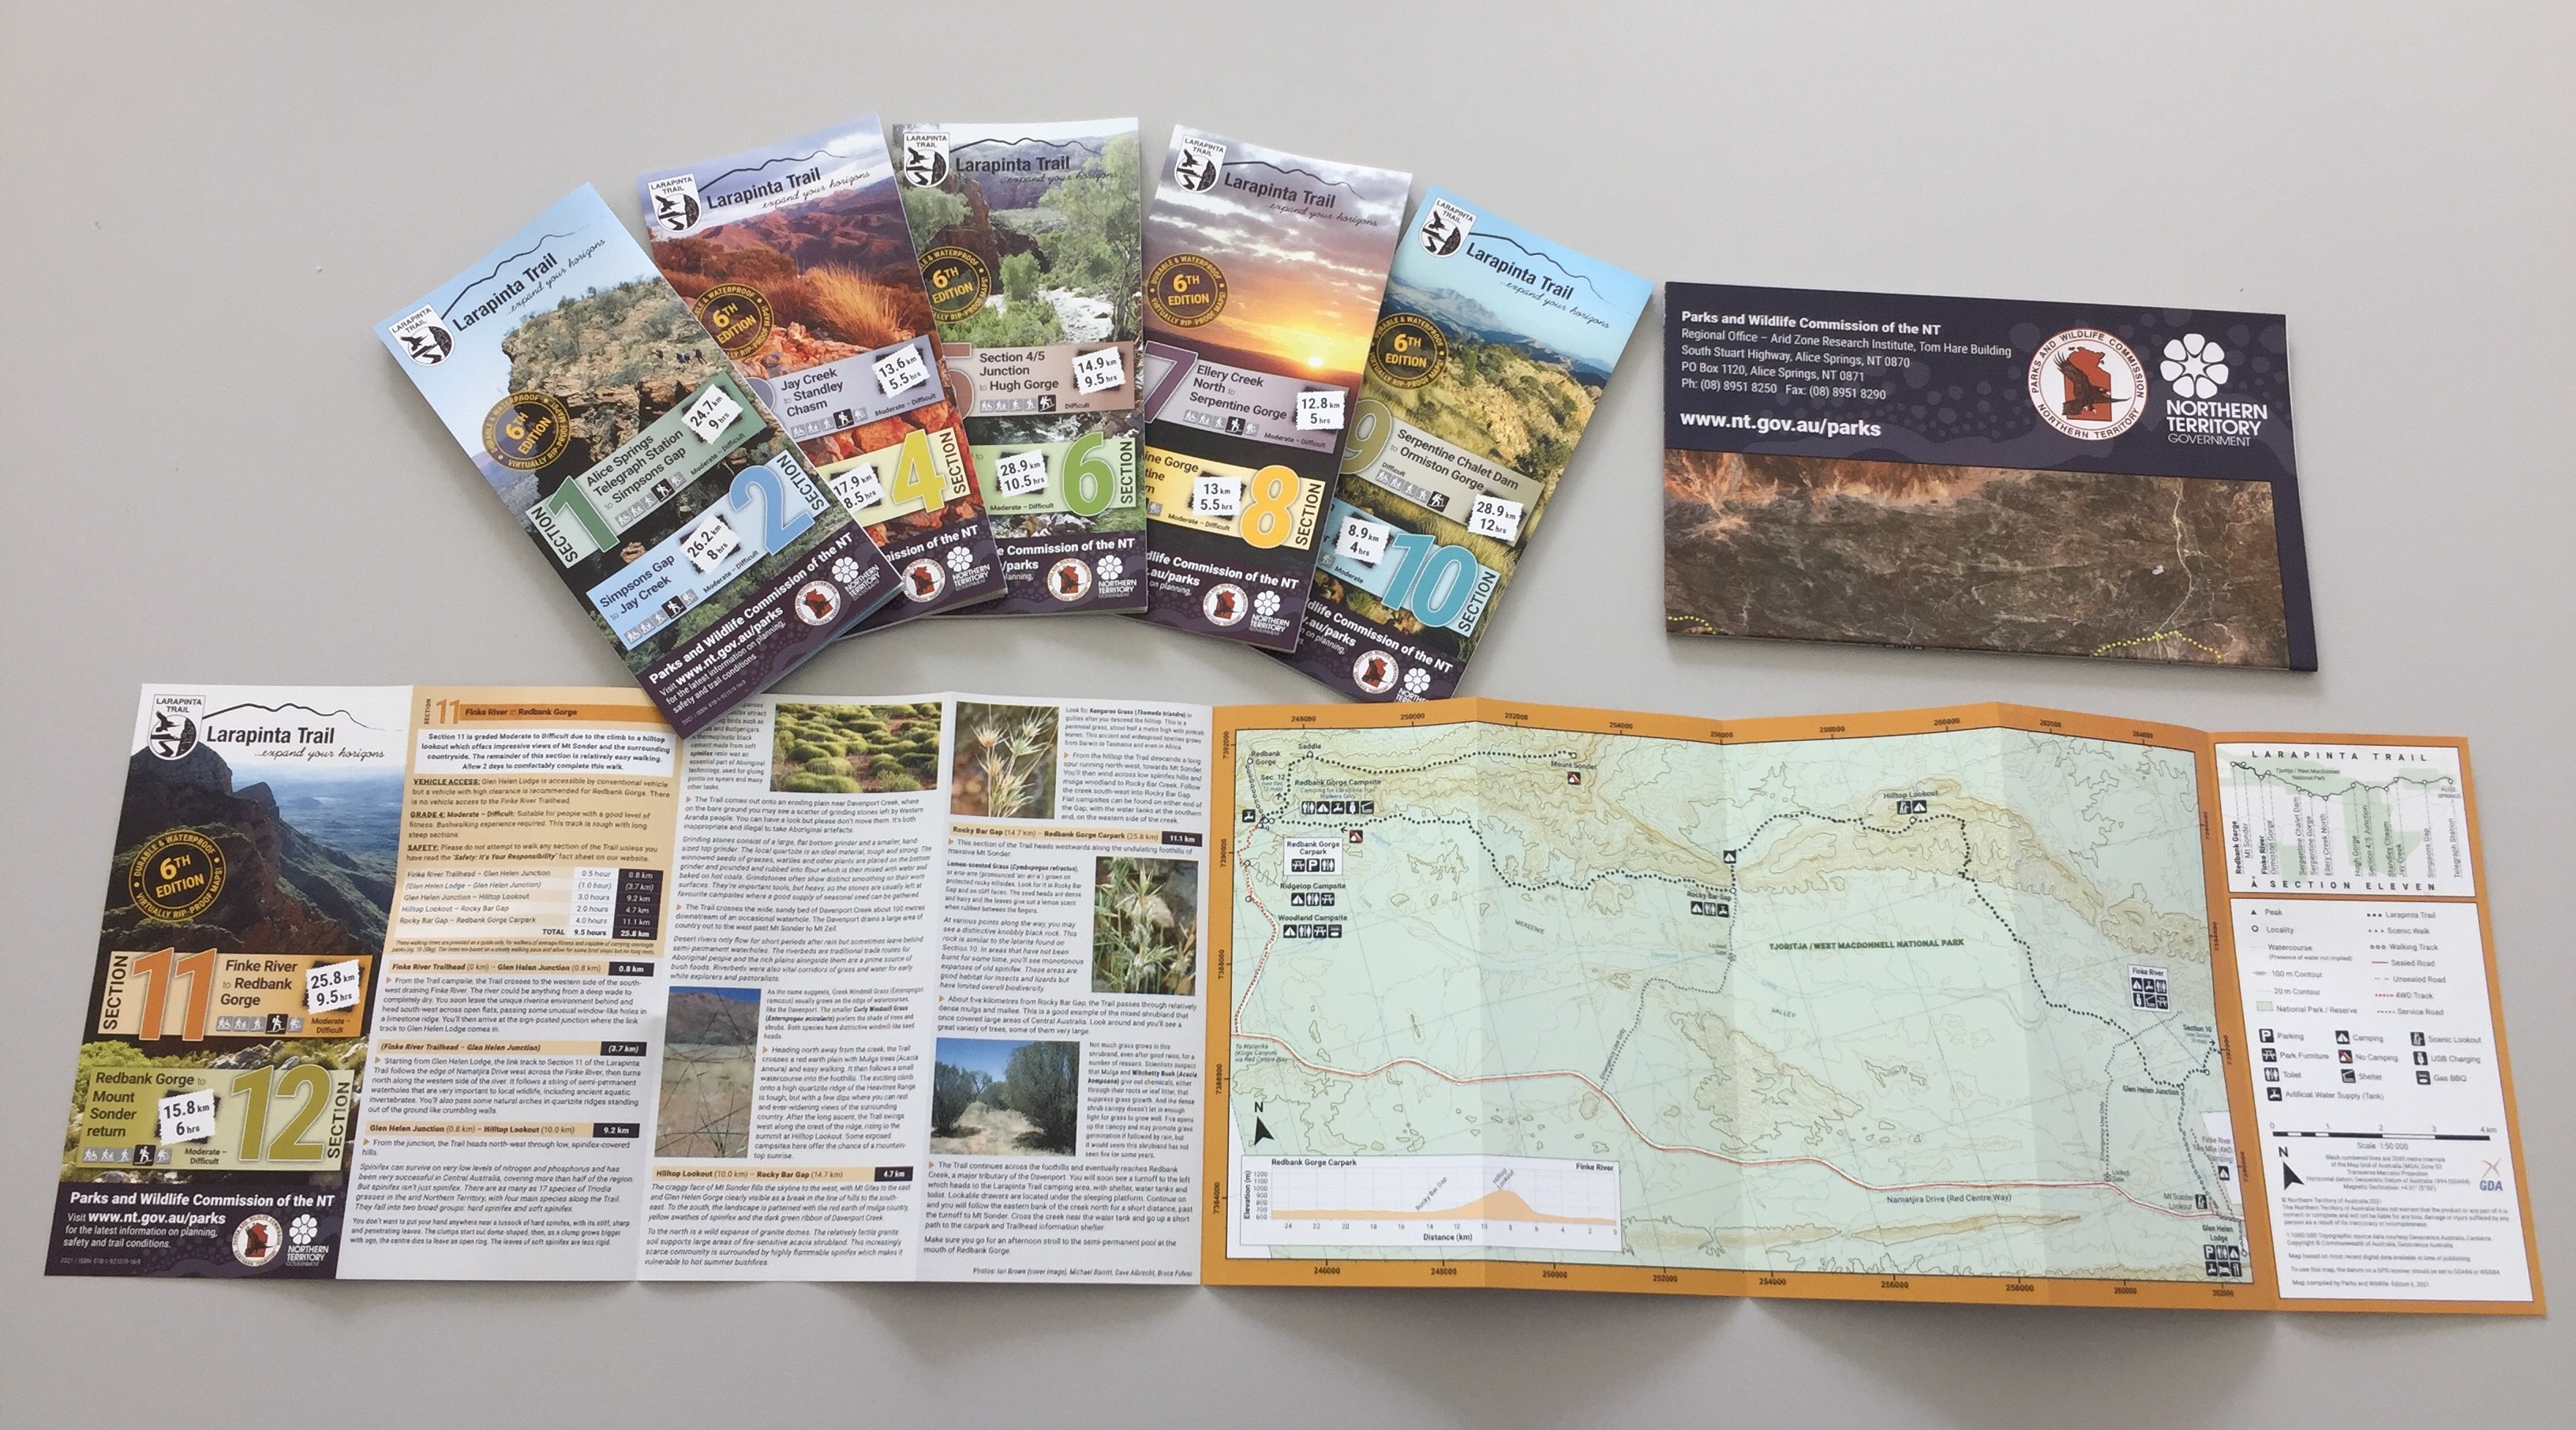 Copies of trail maps and information provided in the pack